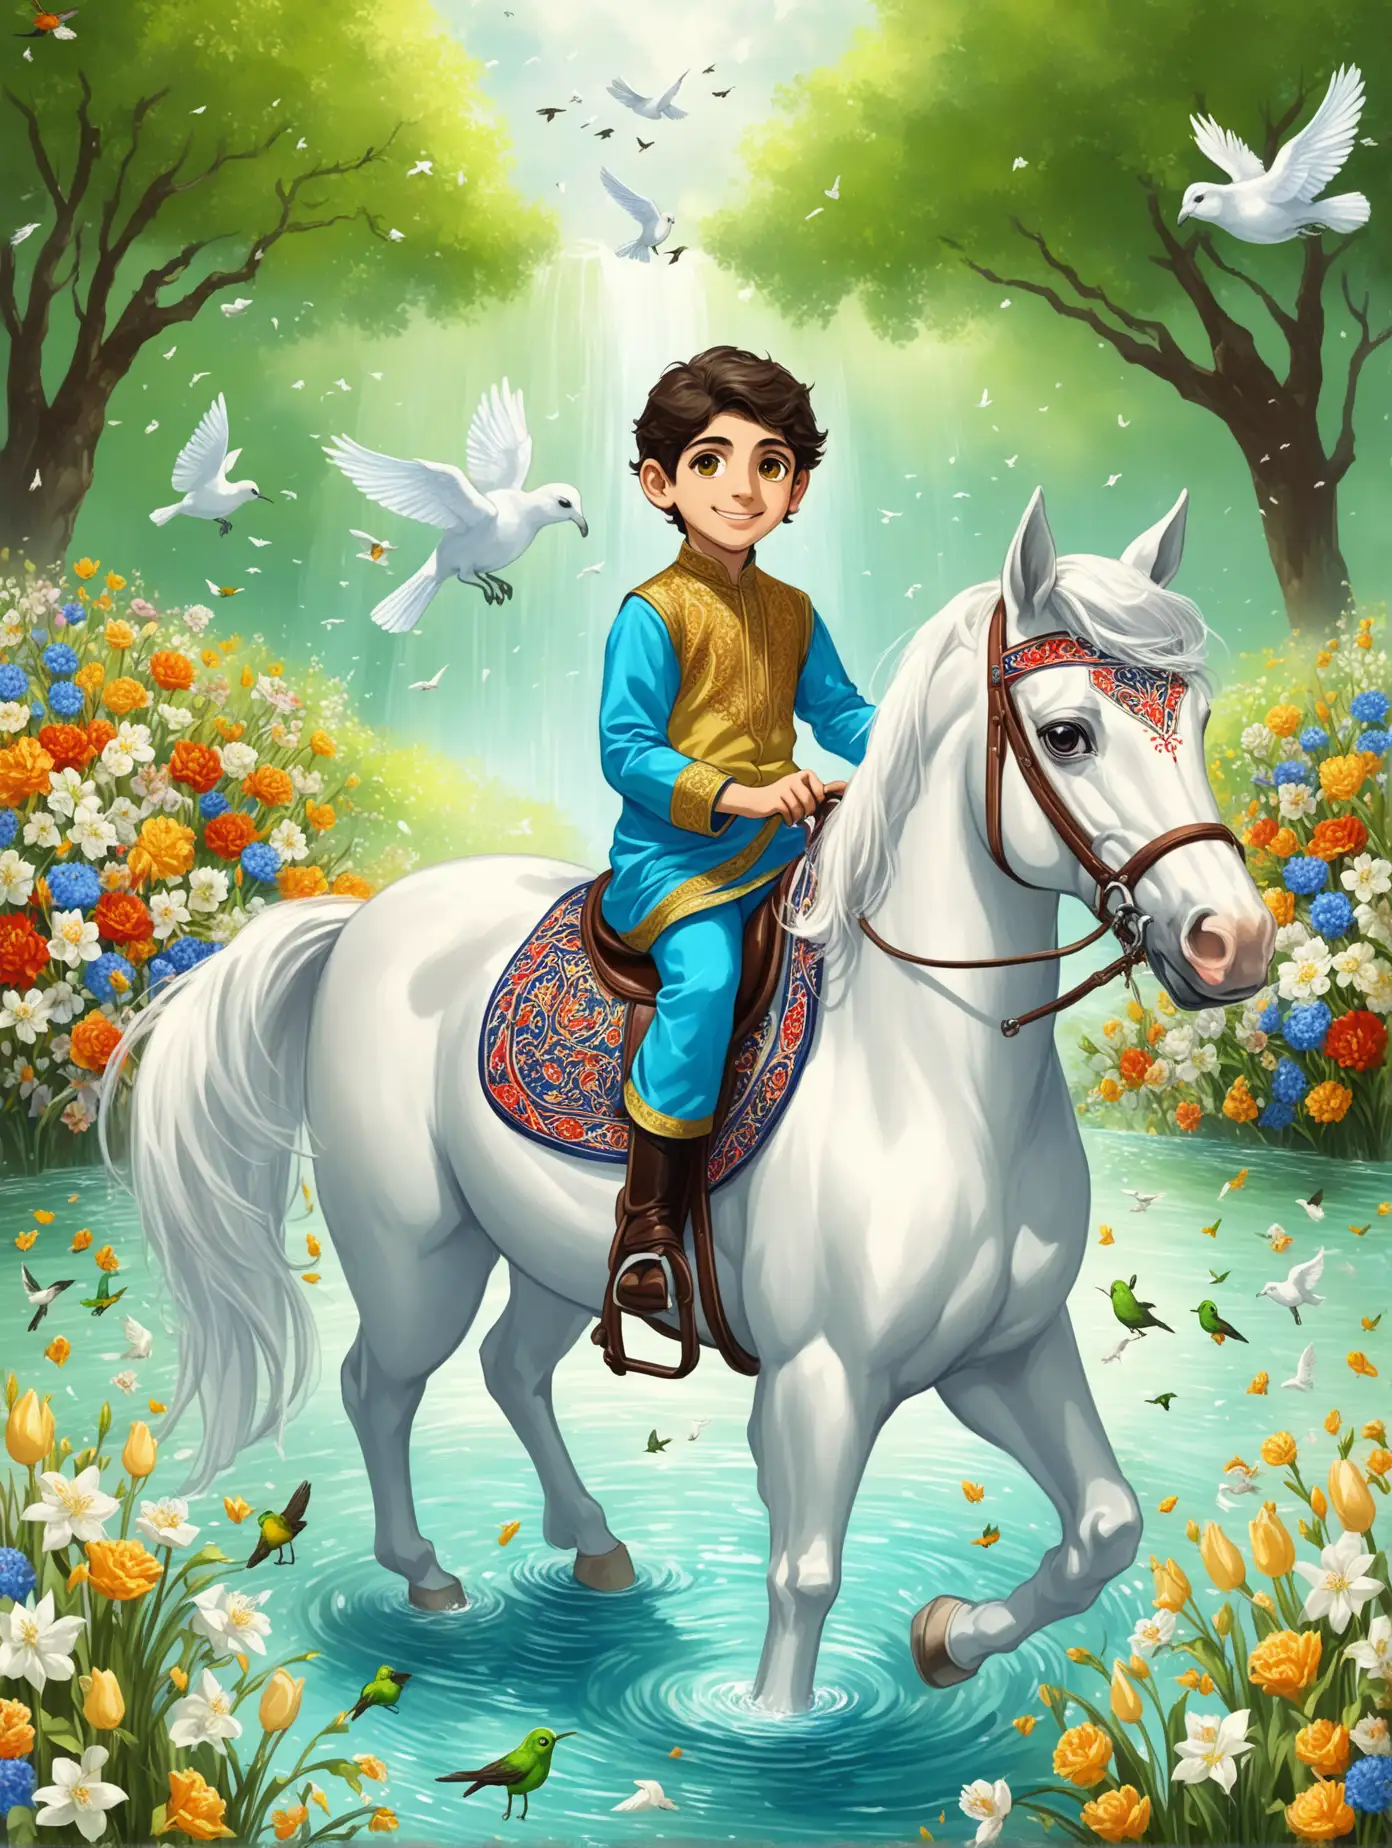 Character Persian 9 years old boy(riding horse, smaller eyes, bigger nose, white skin, cute, smiling, clothes full of Persian designs, heavenly boy).

Atmosphere flowing water from the spring with flowers, nightingales and flying birds in spring.